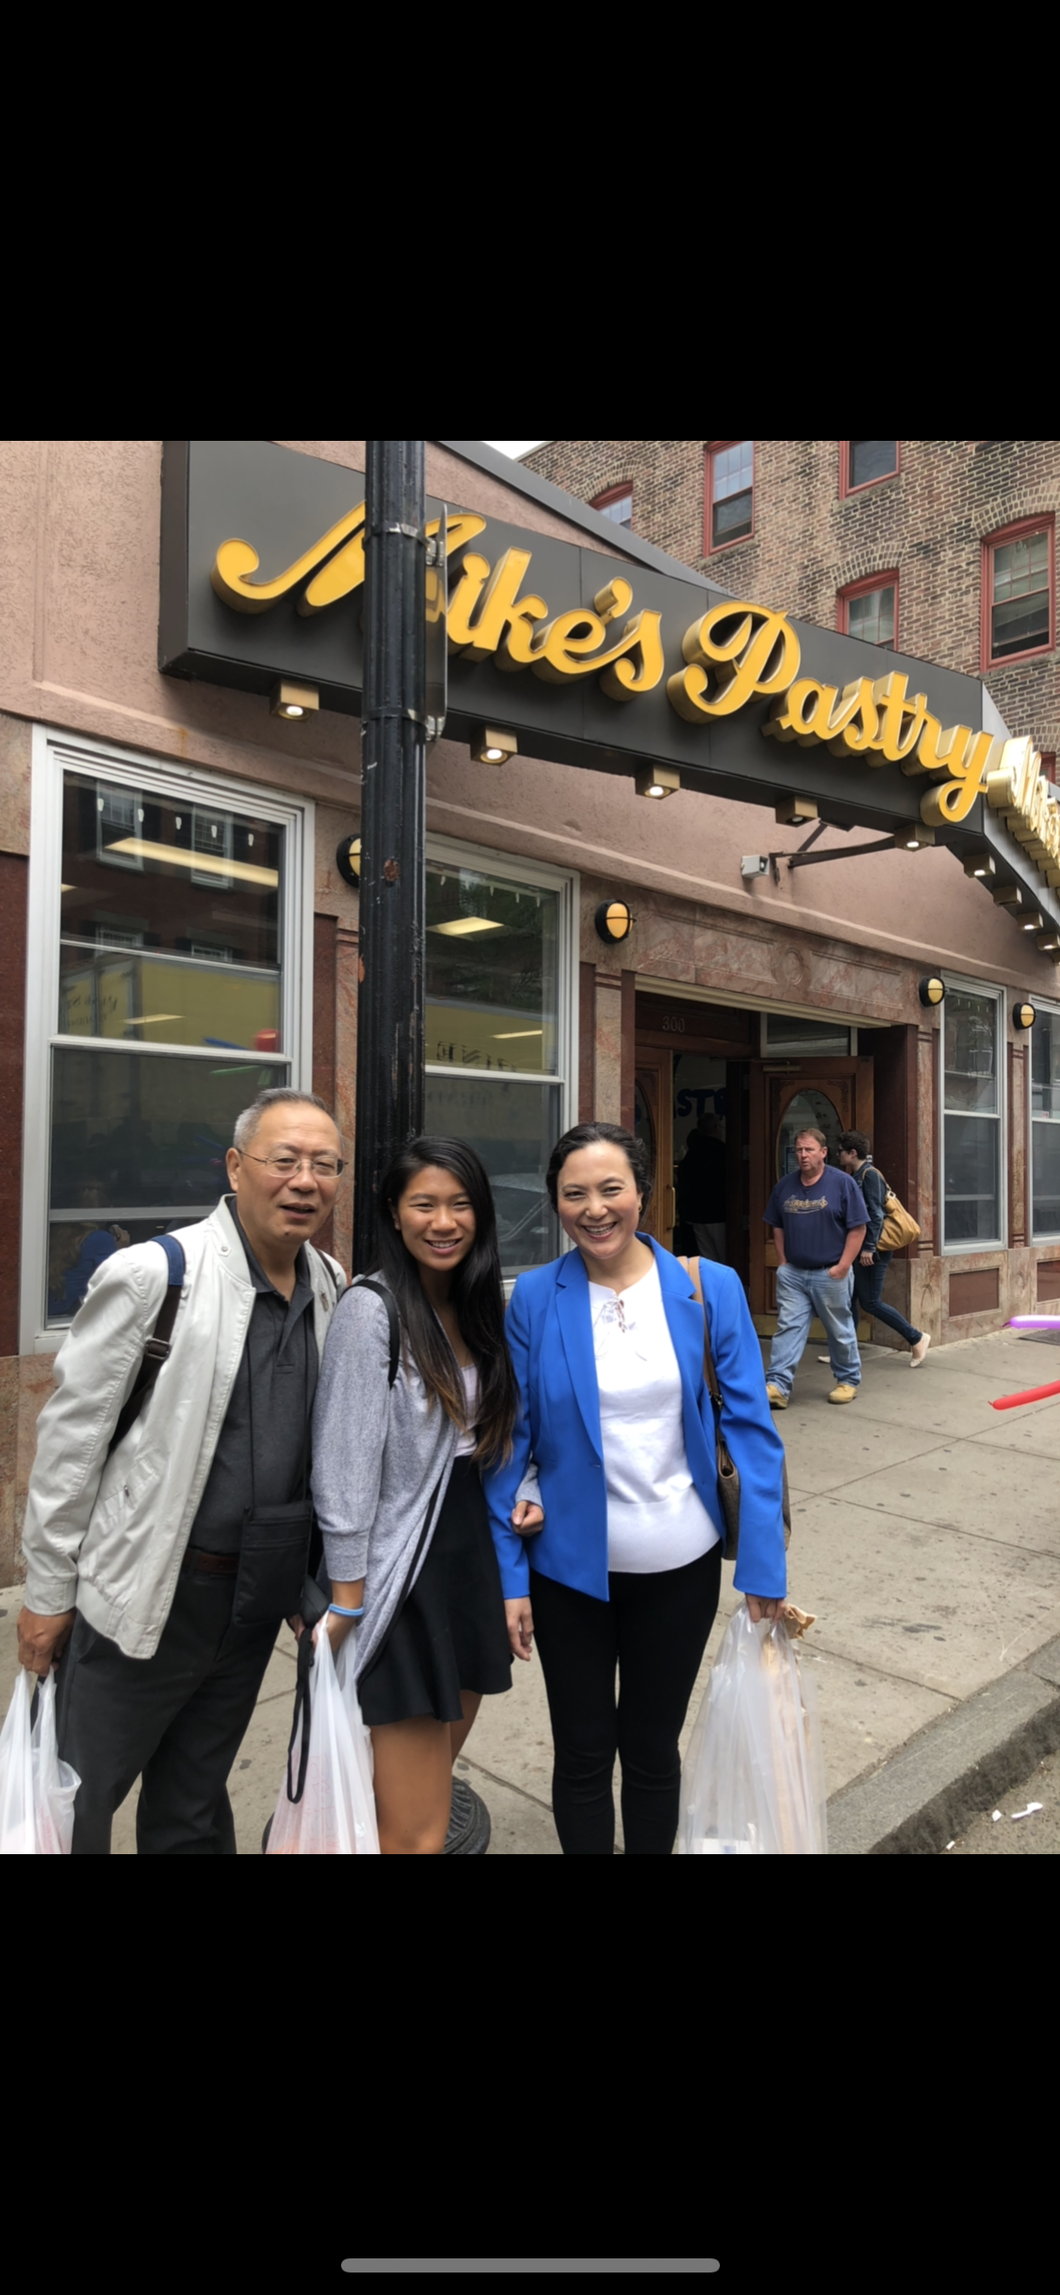 family in front of a restaurant